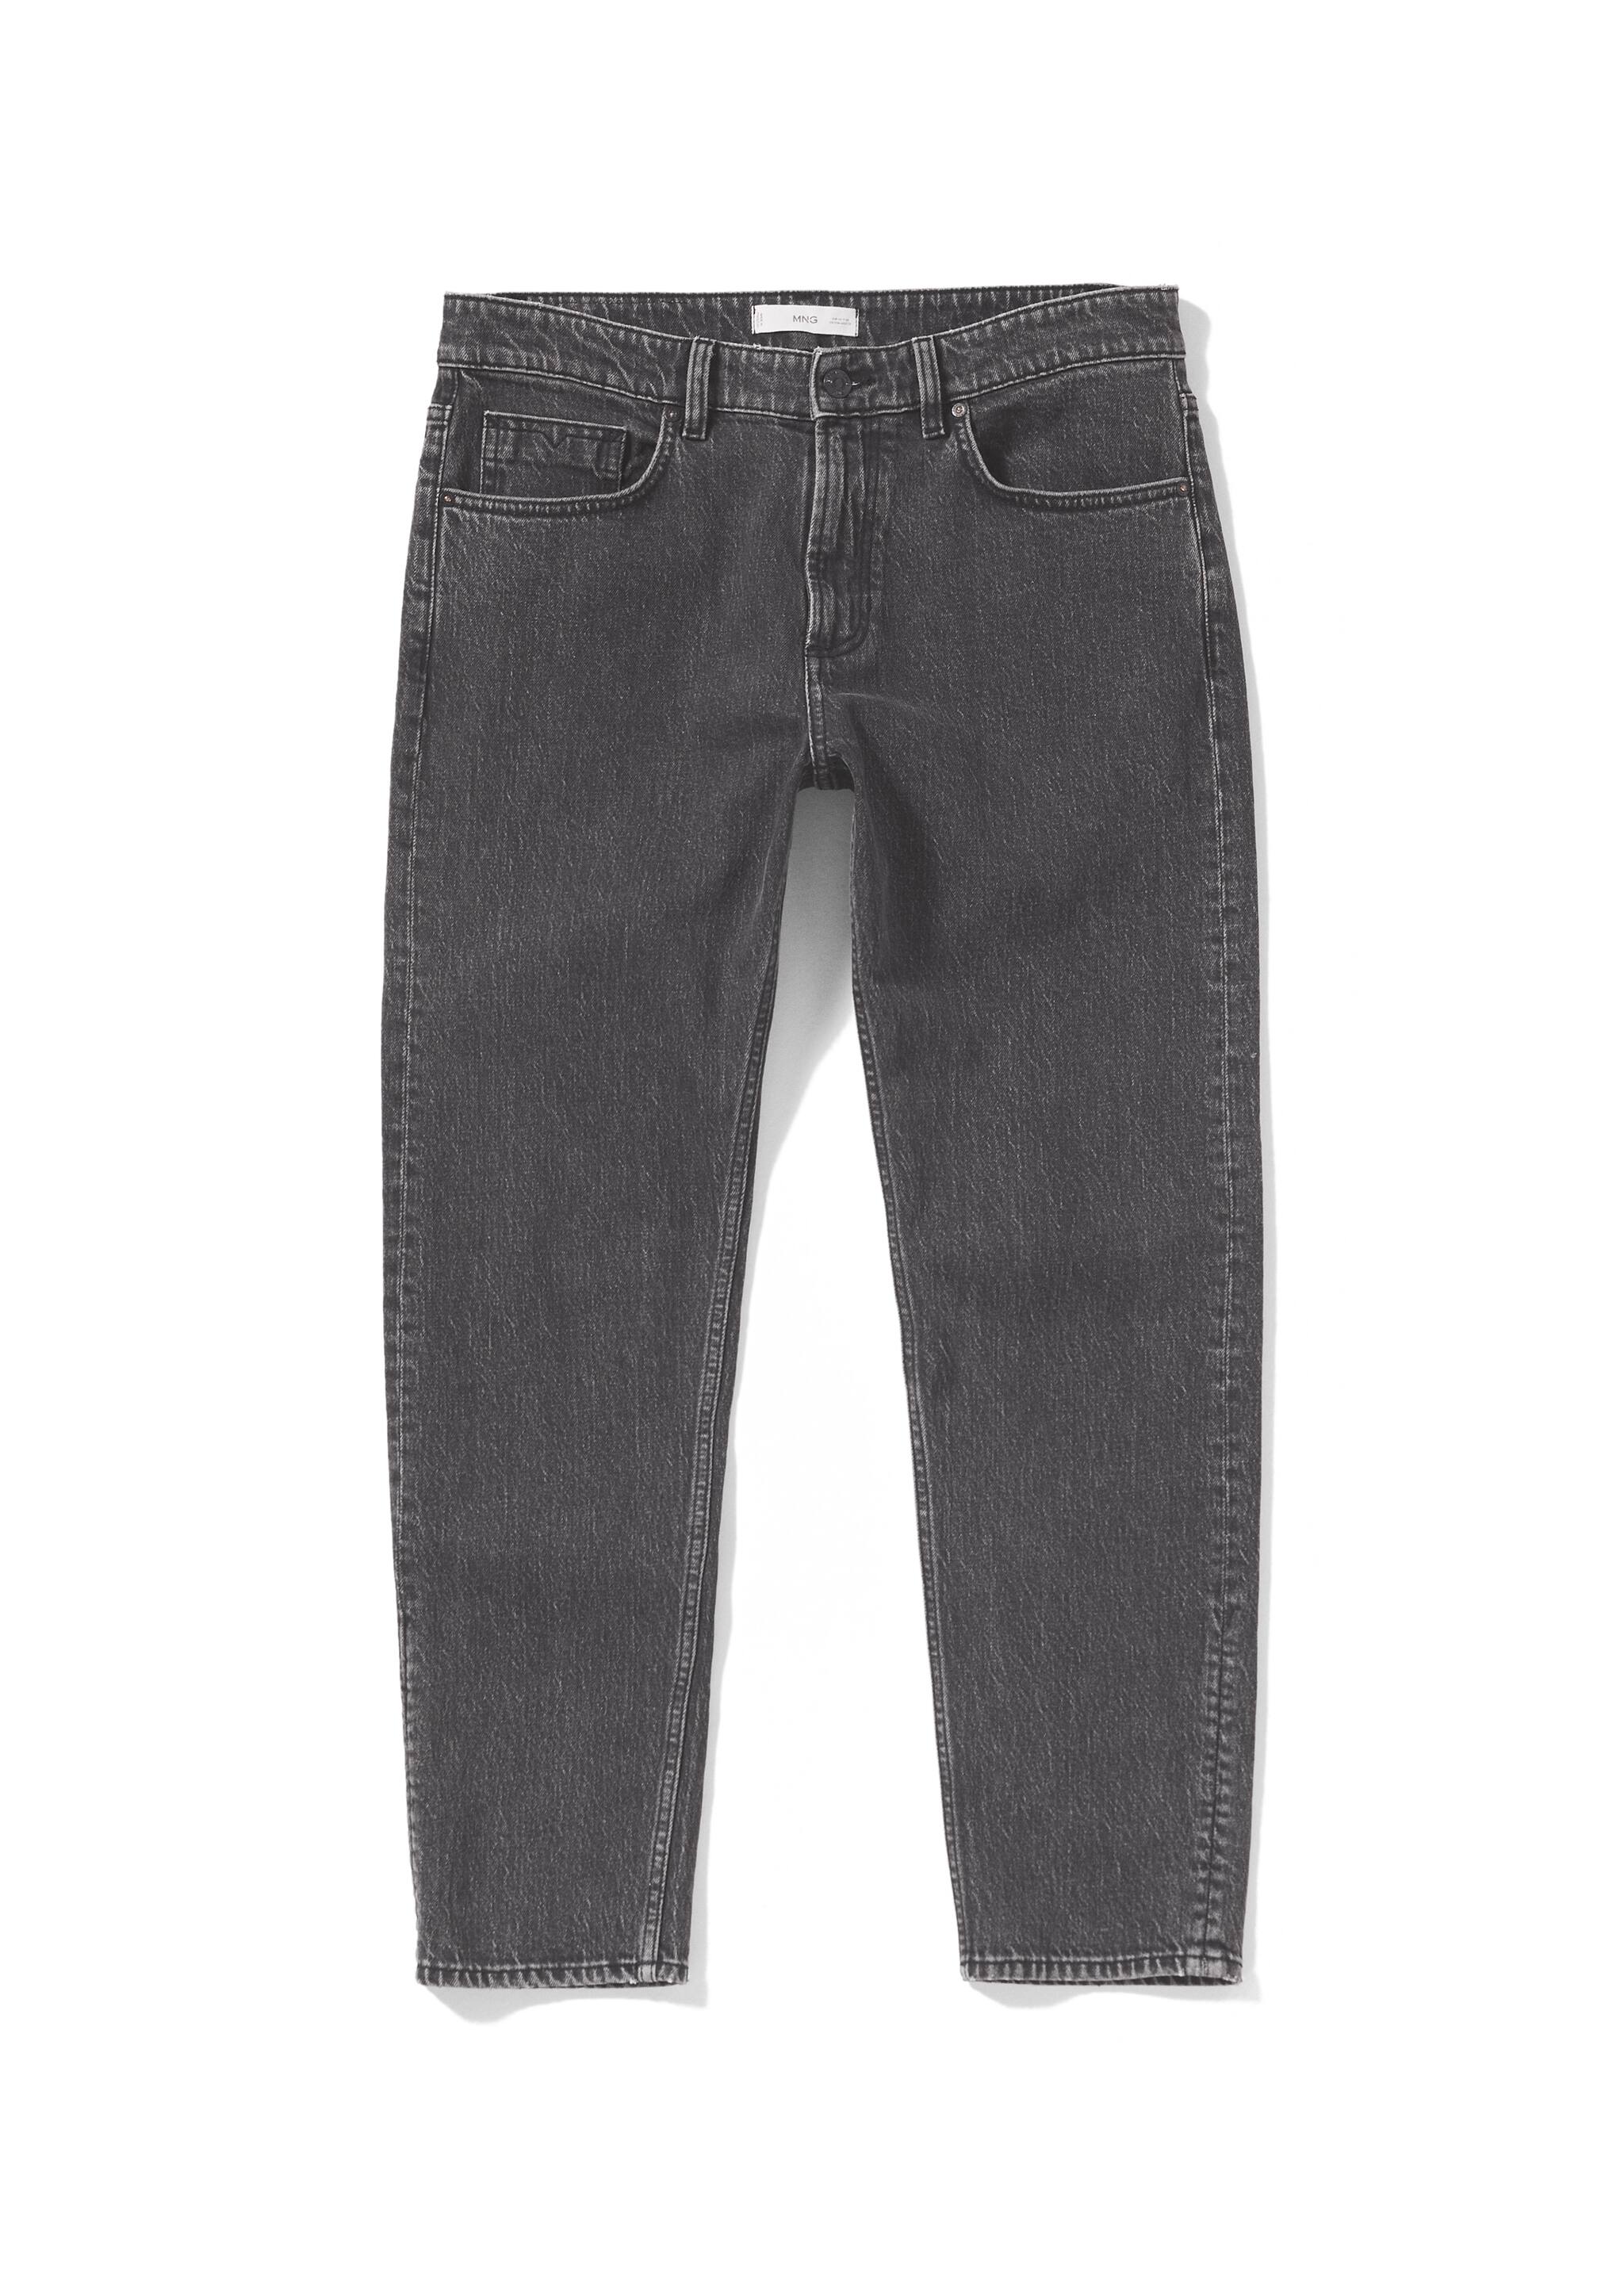 Ben tapered cropped jeans - Details of the article 9